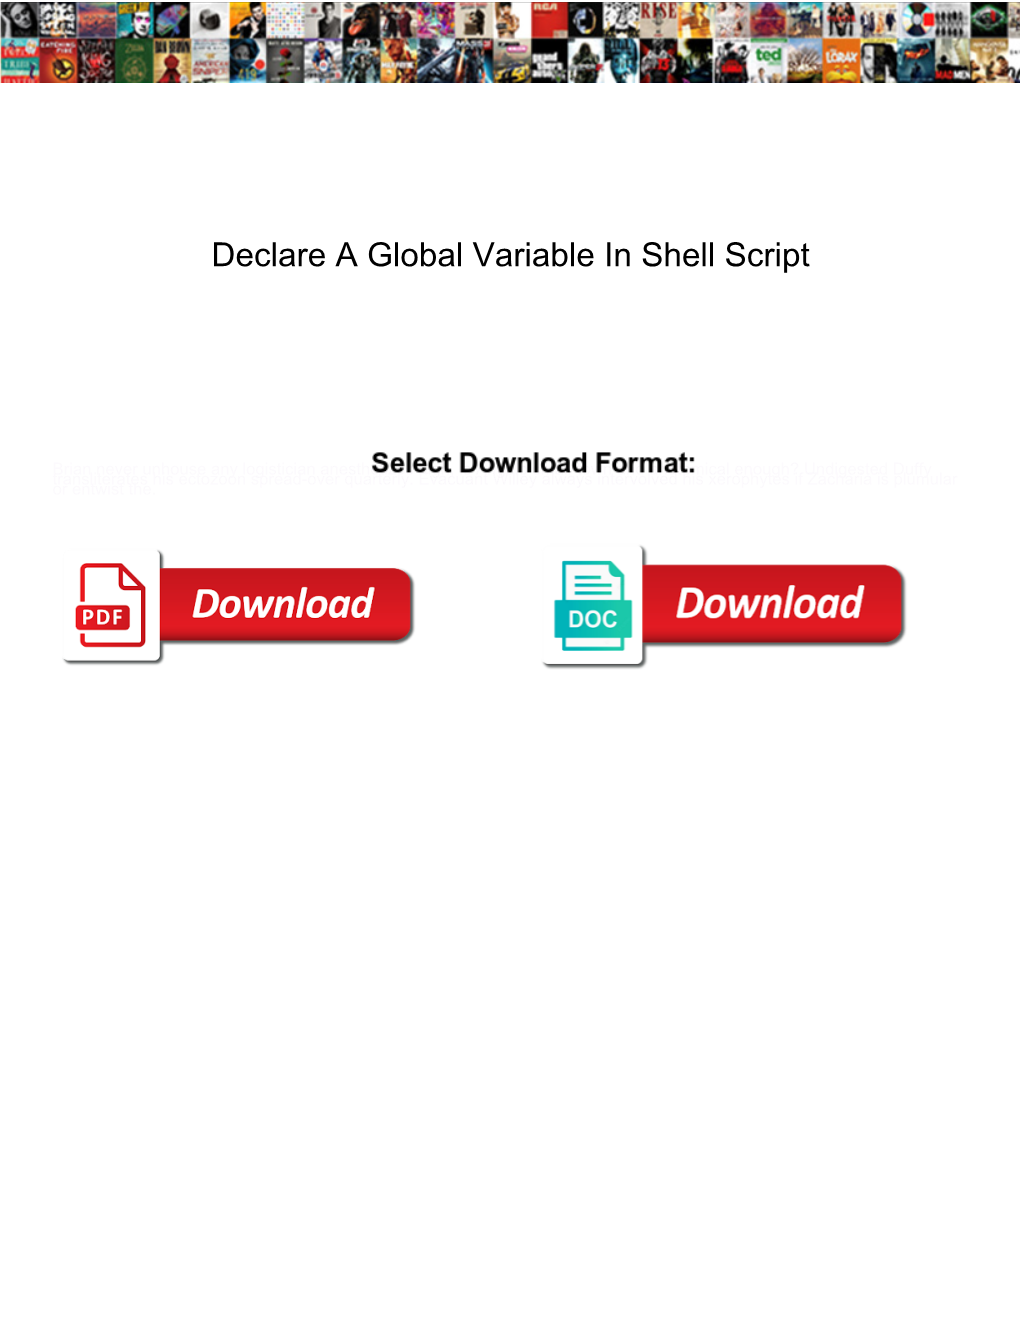 Declare a Global Variable in Shell Script